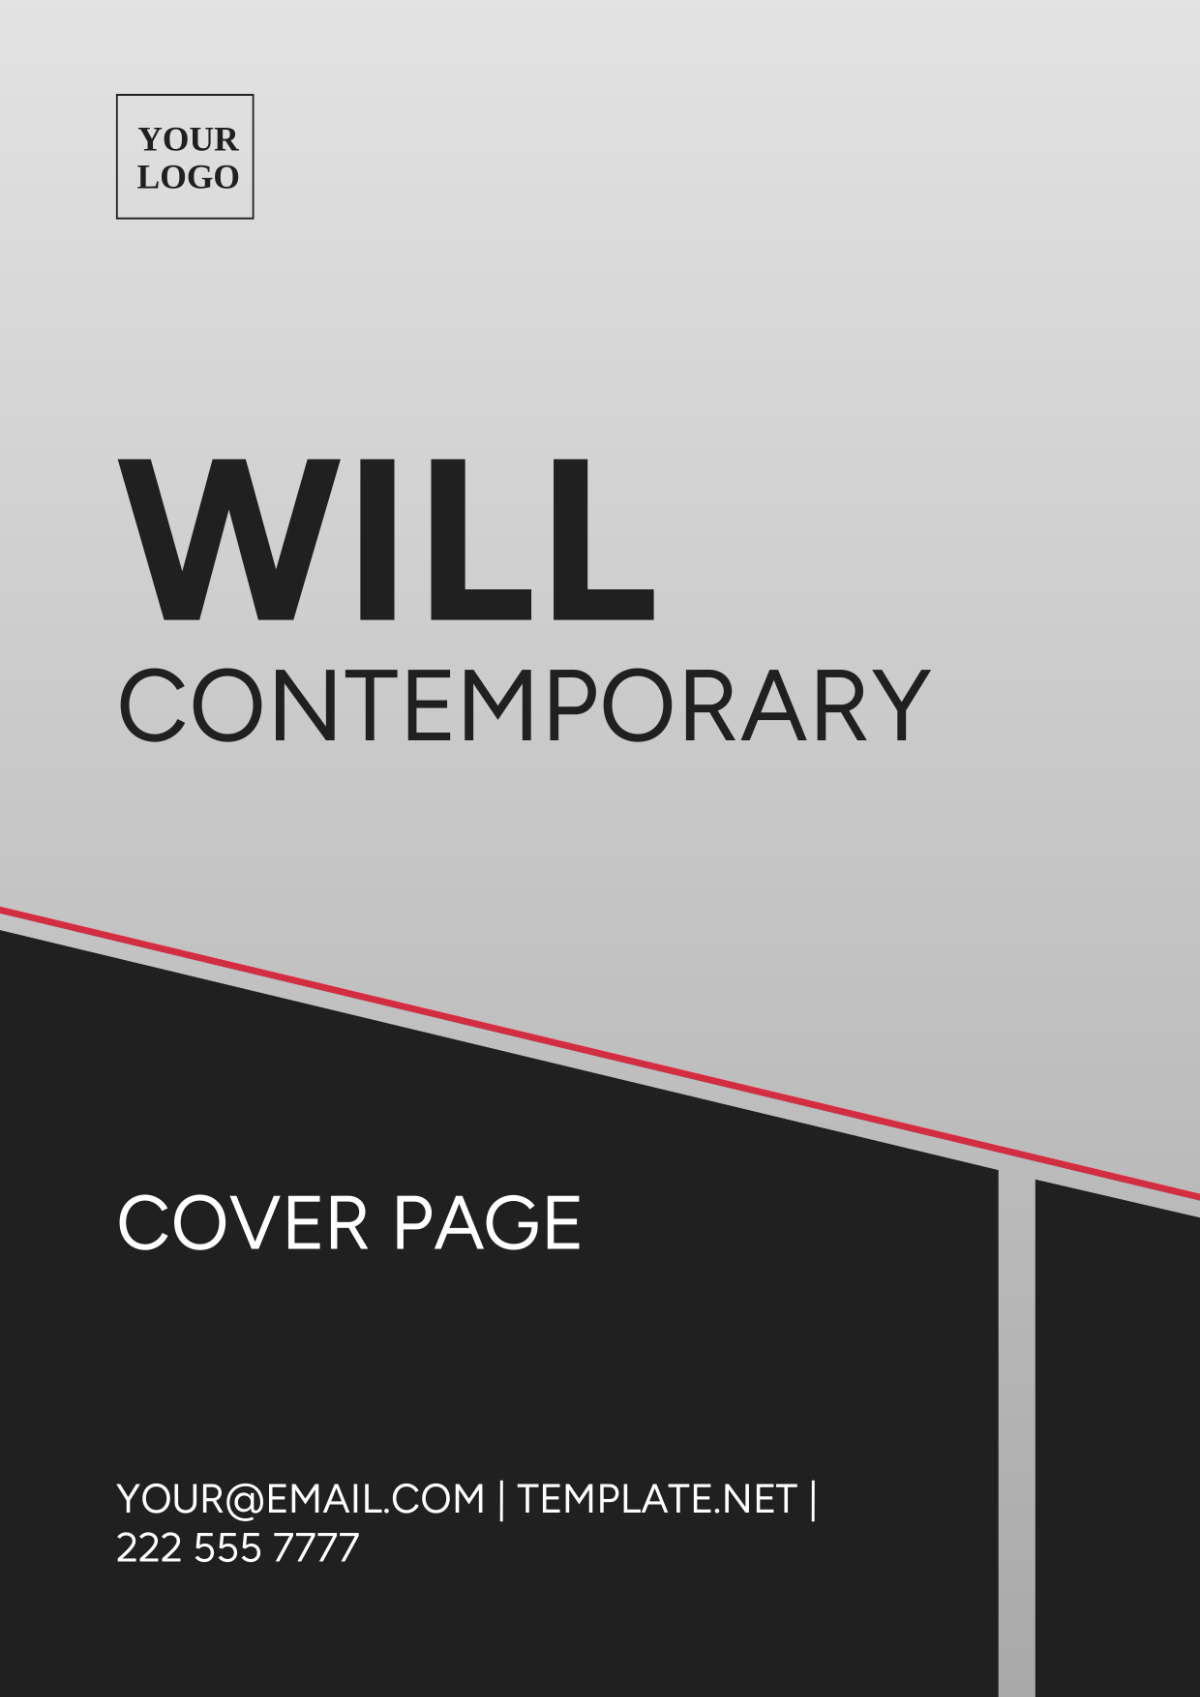 Will Contemporary Cover Page